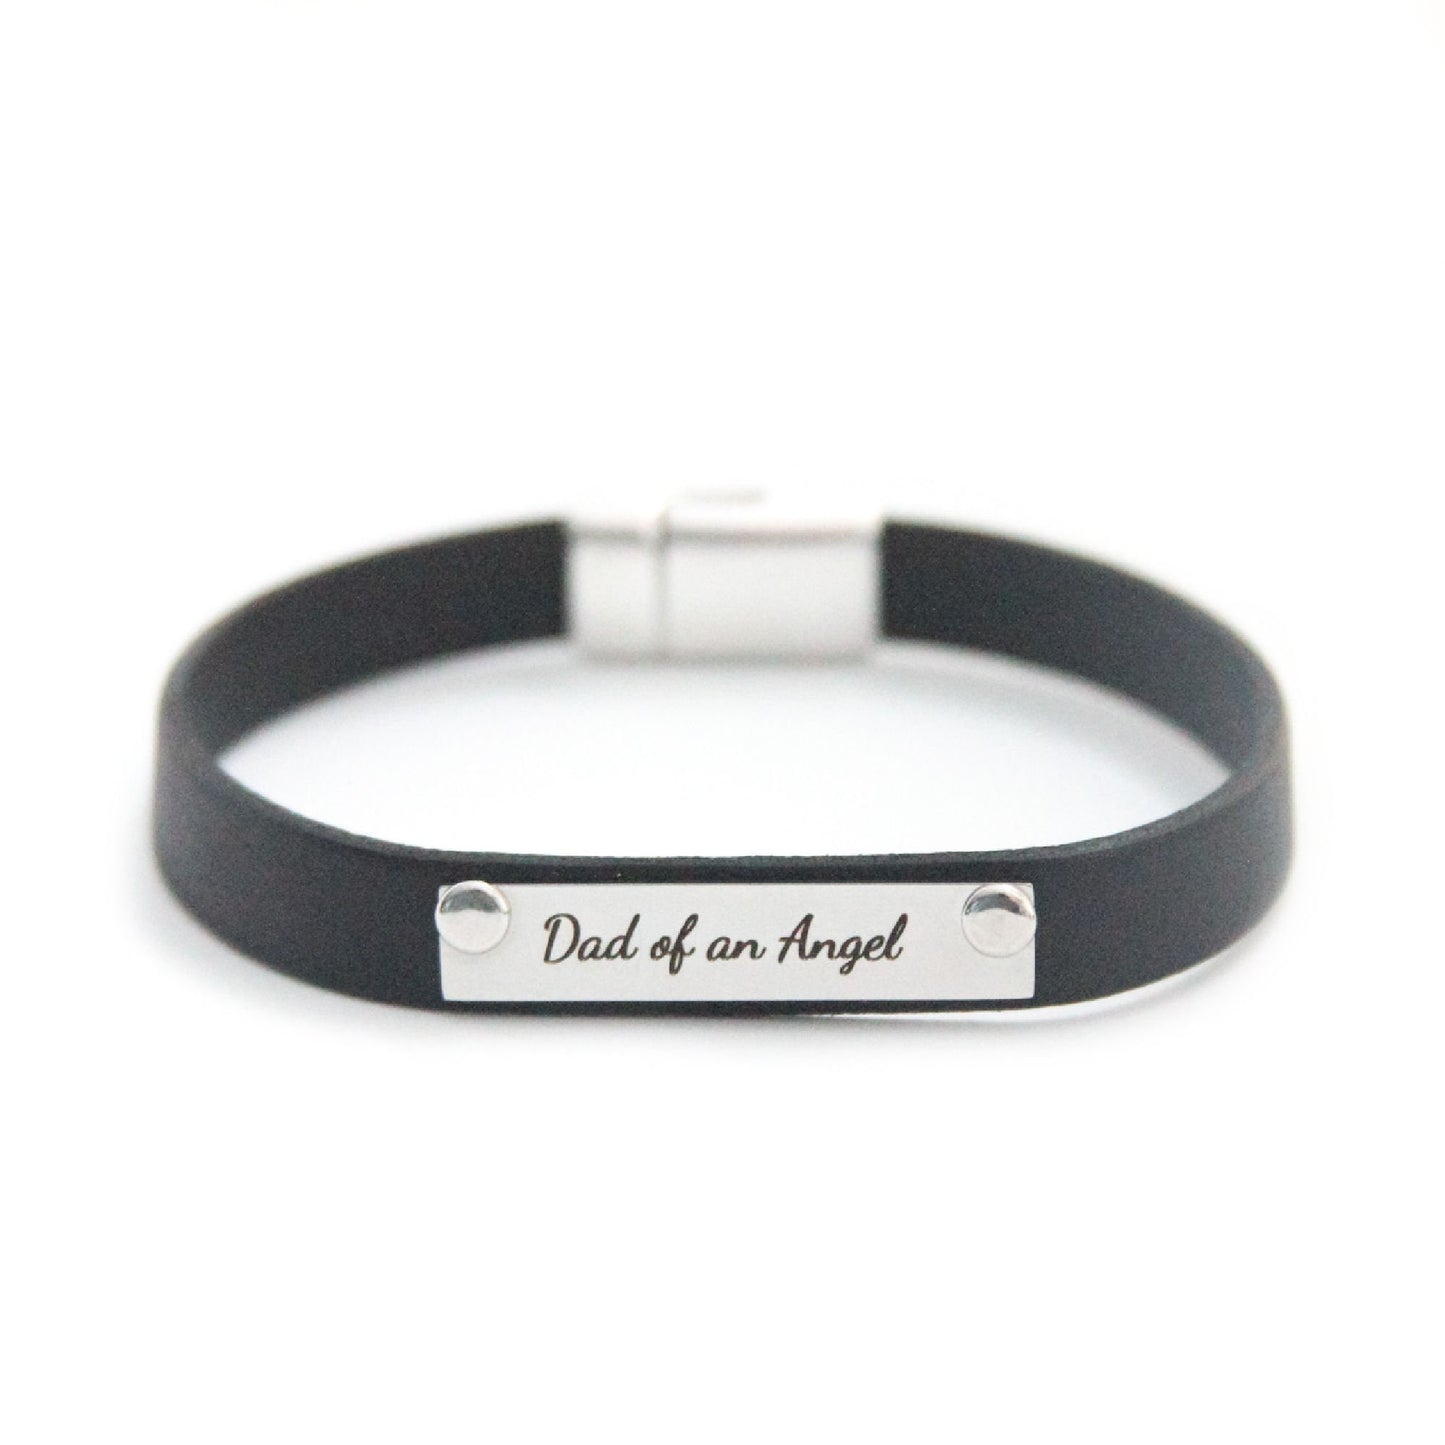 Mom and Dad of an Angel Leather Bracelet Set